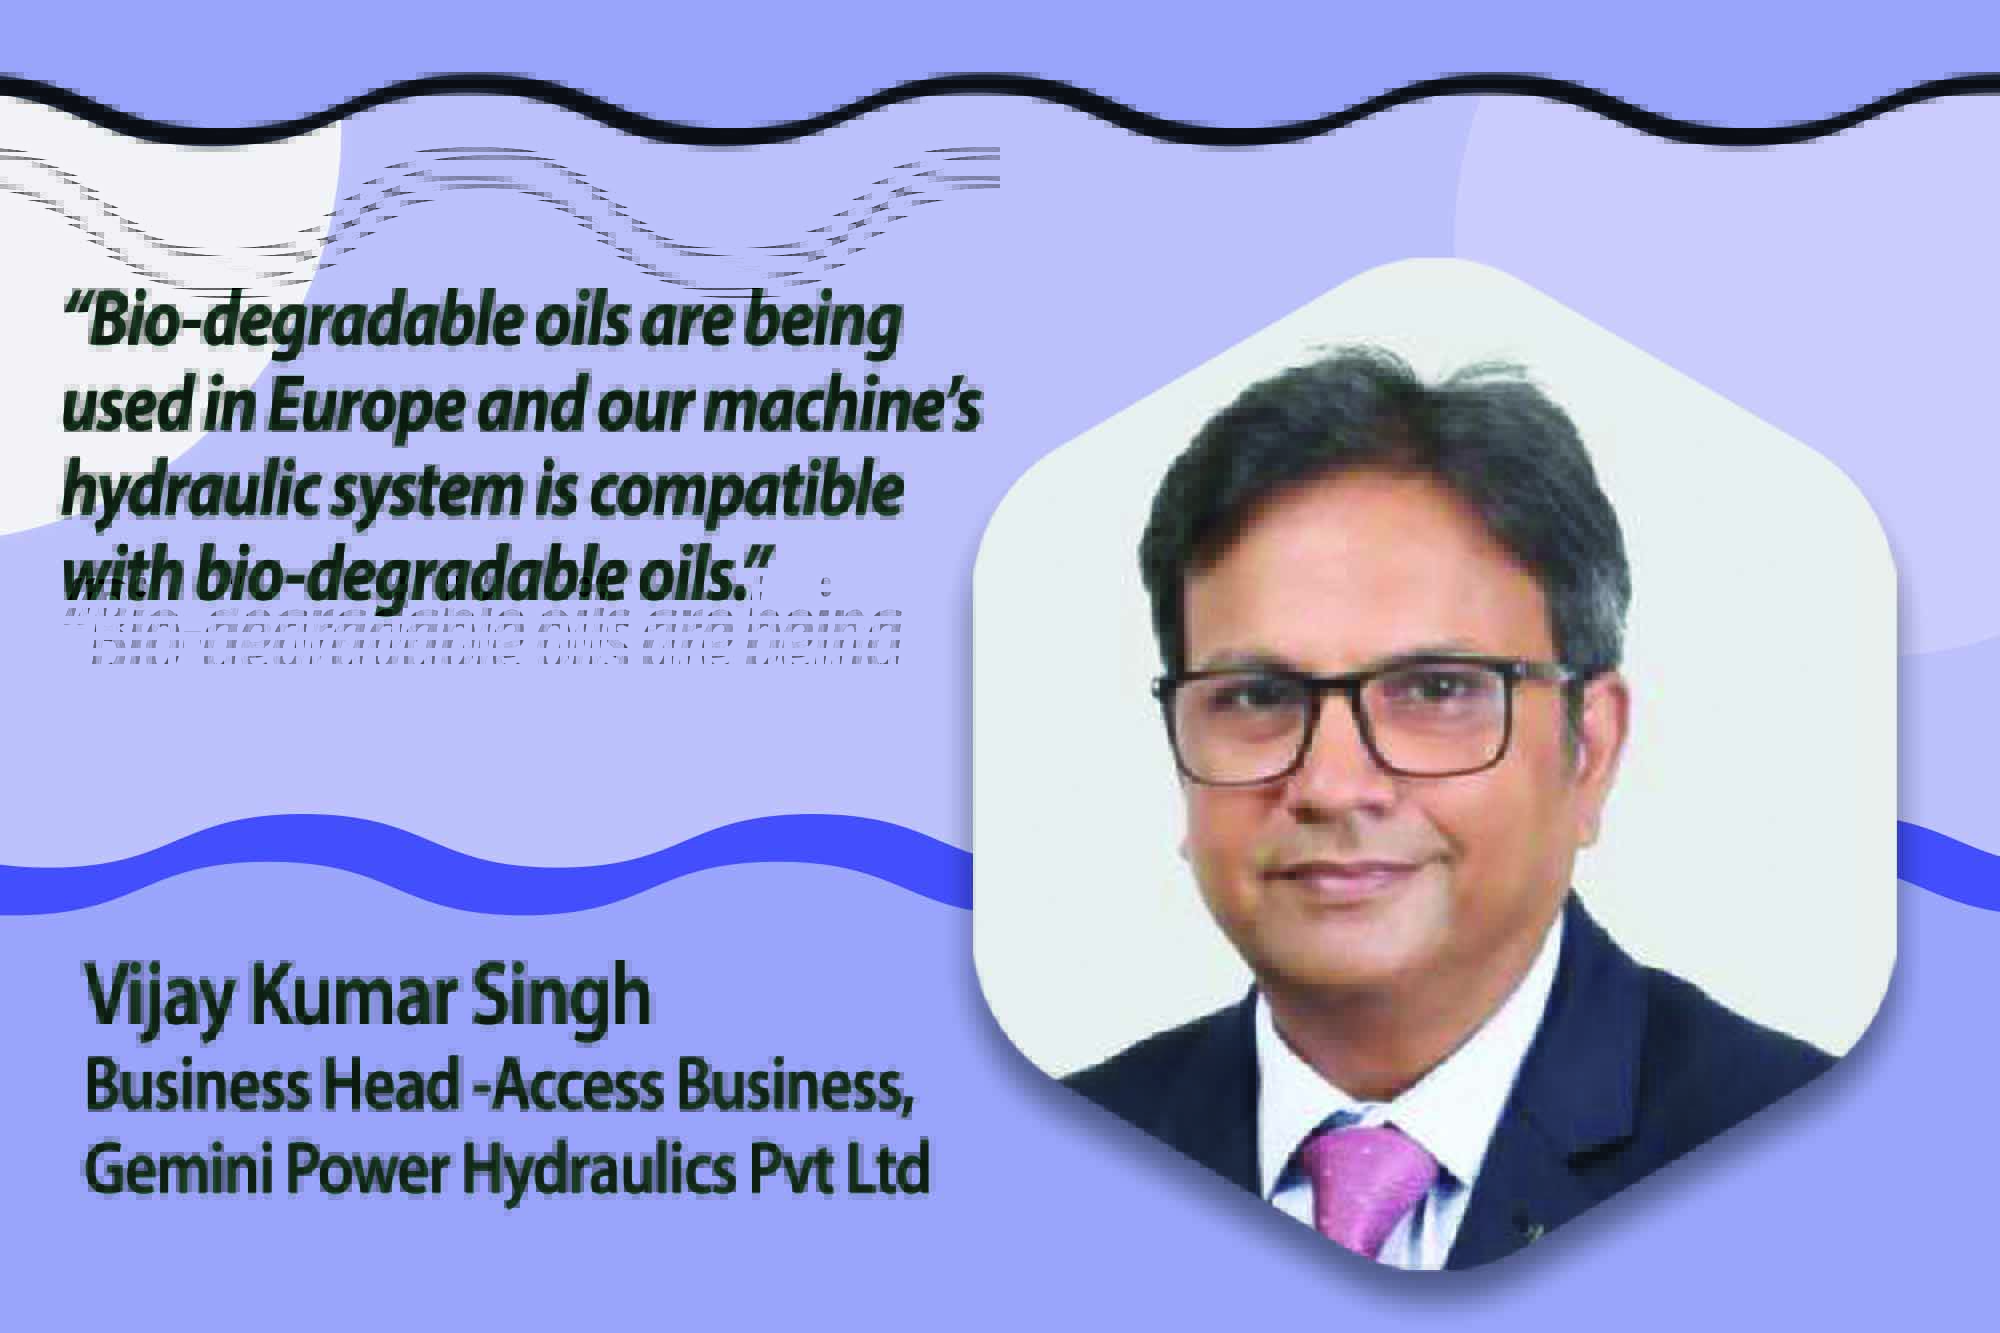 Gemini Power Hydraulics Pvt. Ltd. prioritizes safety by integrating automated features into its equipment while maintaining the need for human intervention. With a range of safety measures such as overload sensors, tilt alarms, and anti-entrapment systems, Gemini ensures the safety of operators and materials, even in the most challenging conditions.